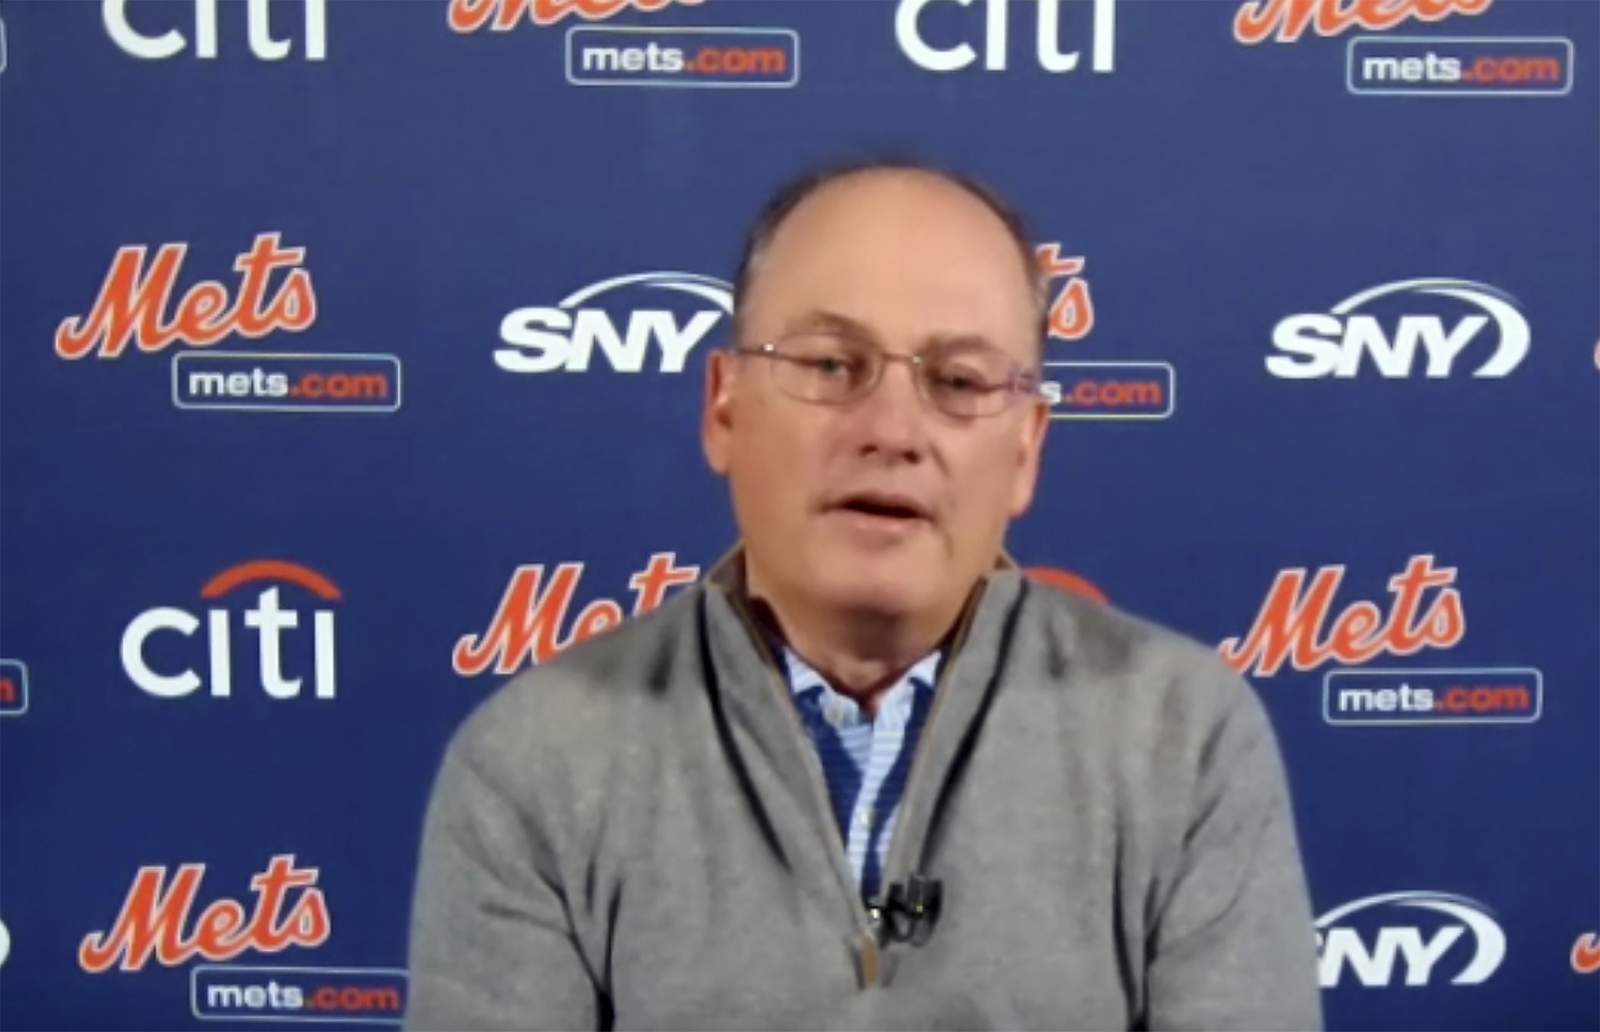 Cohen promises splashes of cash for Mets -- within reason